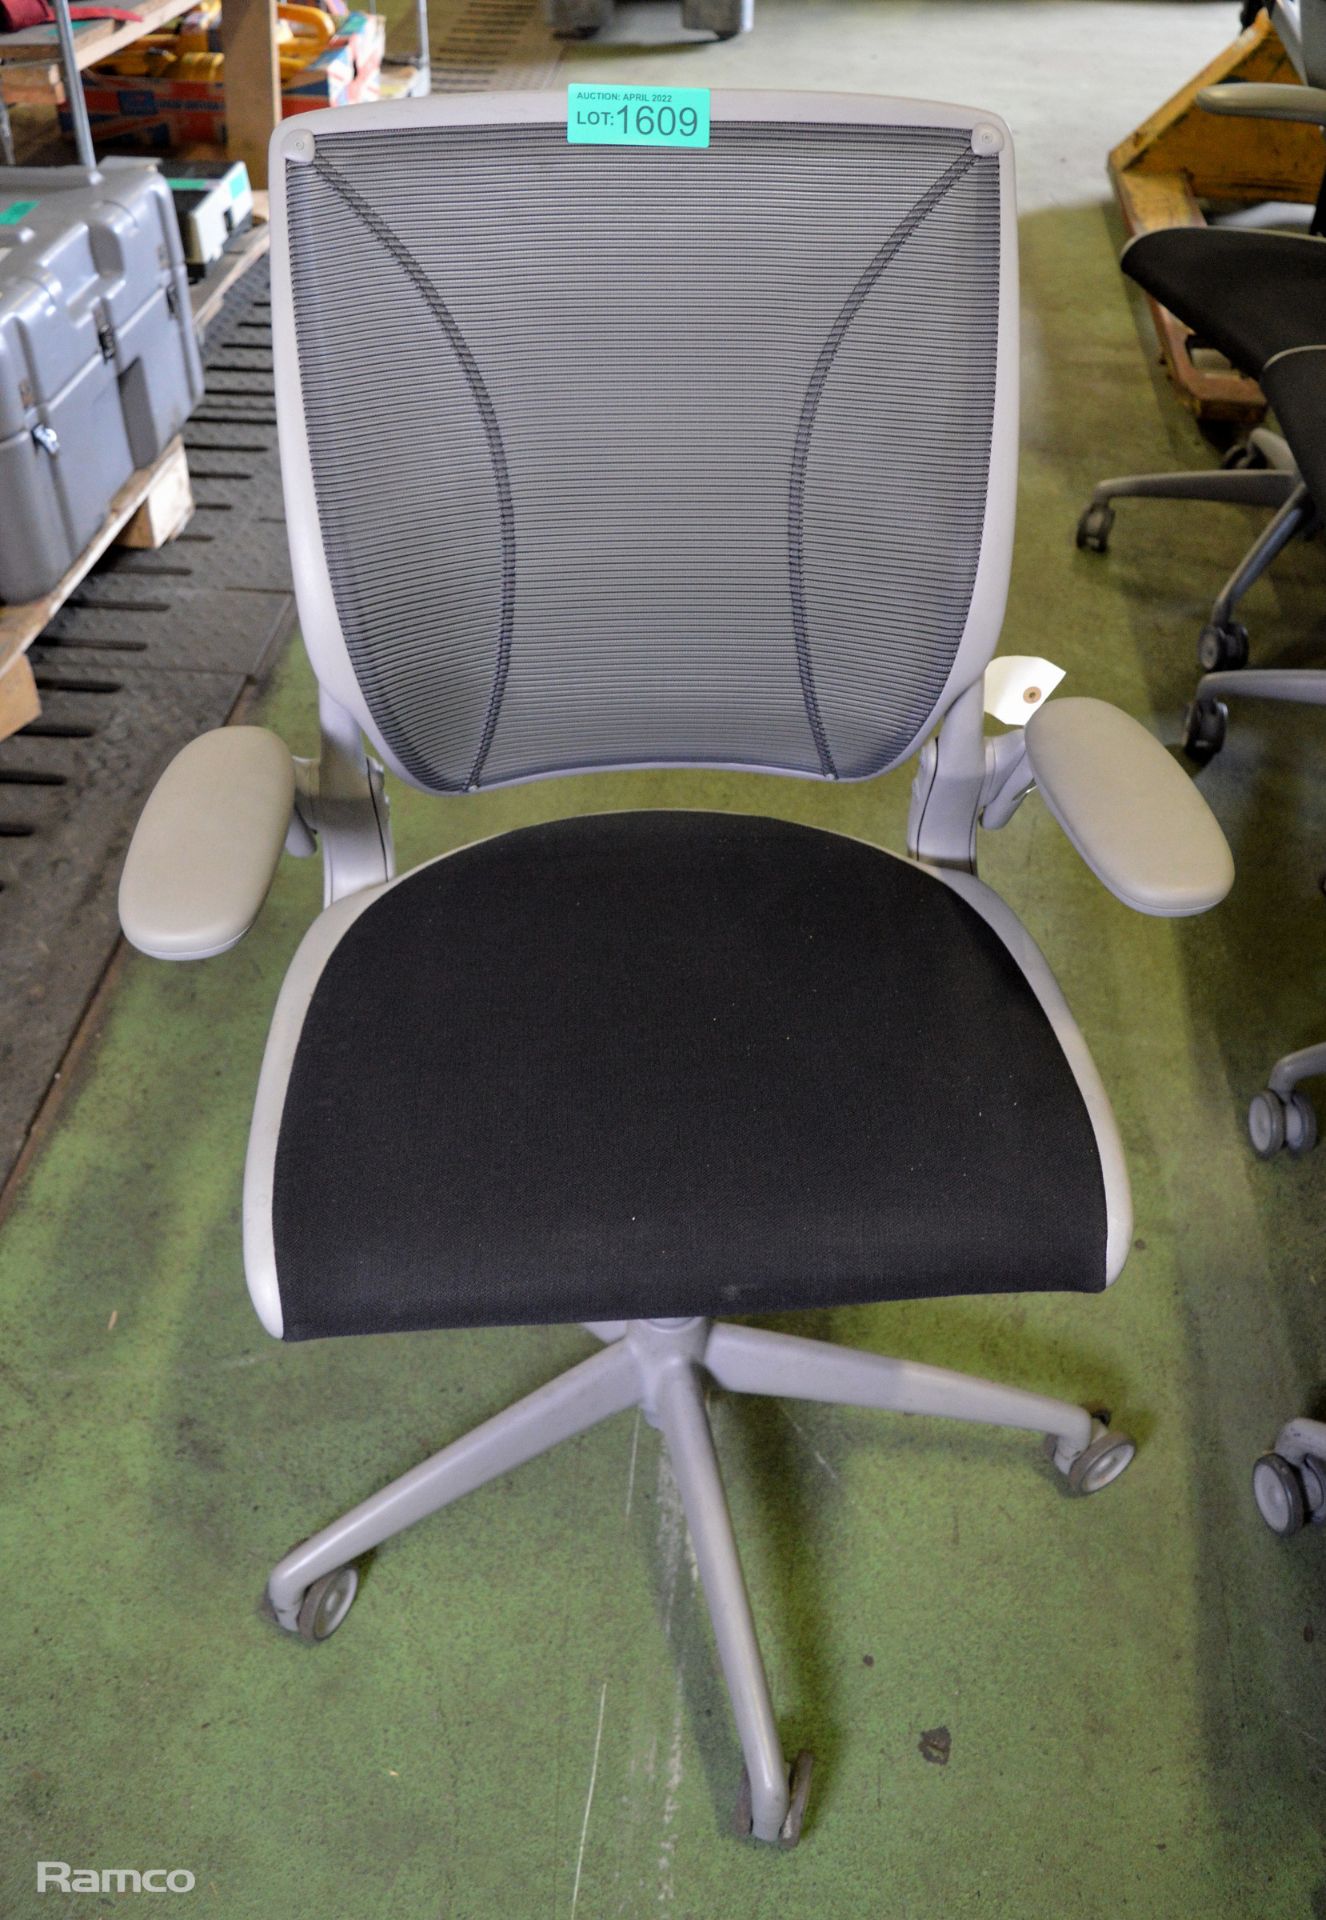 HumanScale Ergonomic Office Chair - grey - Image 2 of 3